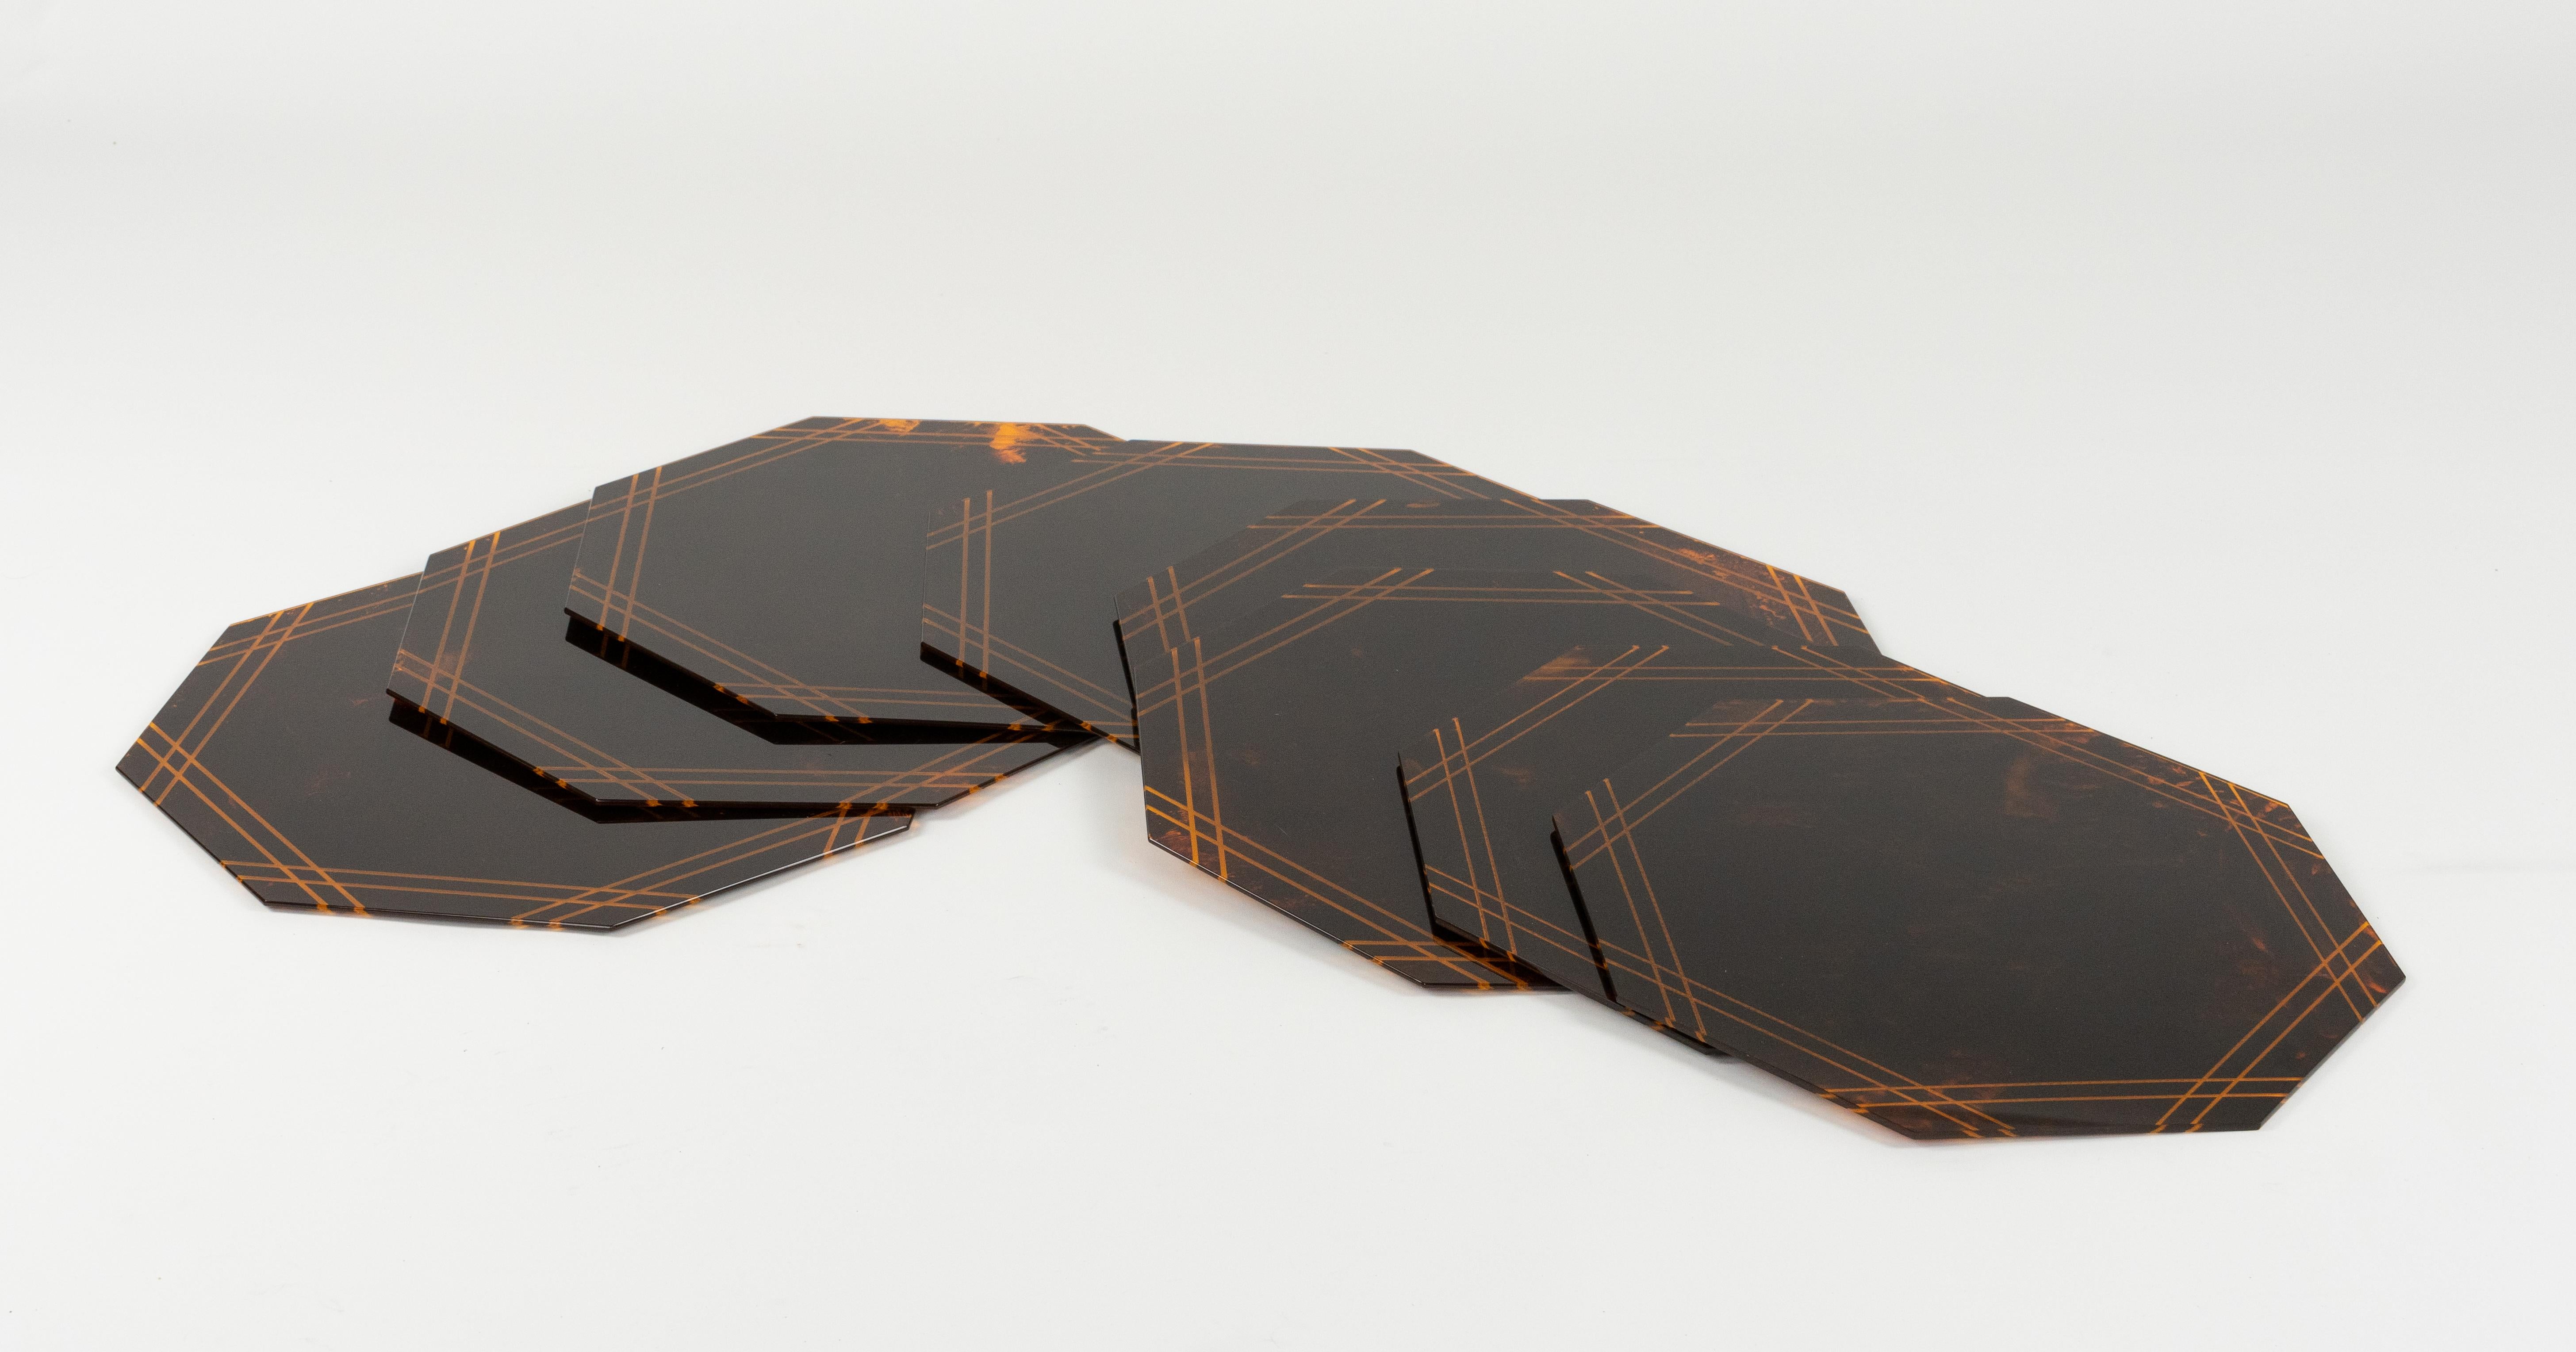 Italian Set of Eight Placemats Tortoiseshell Effect Lucite by Team Guzzini, Italy 1970s For Sale